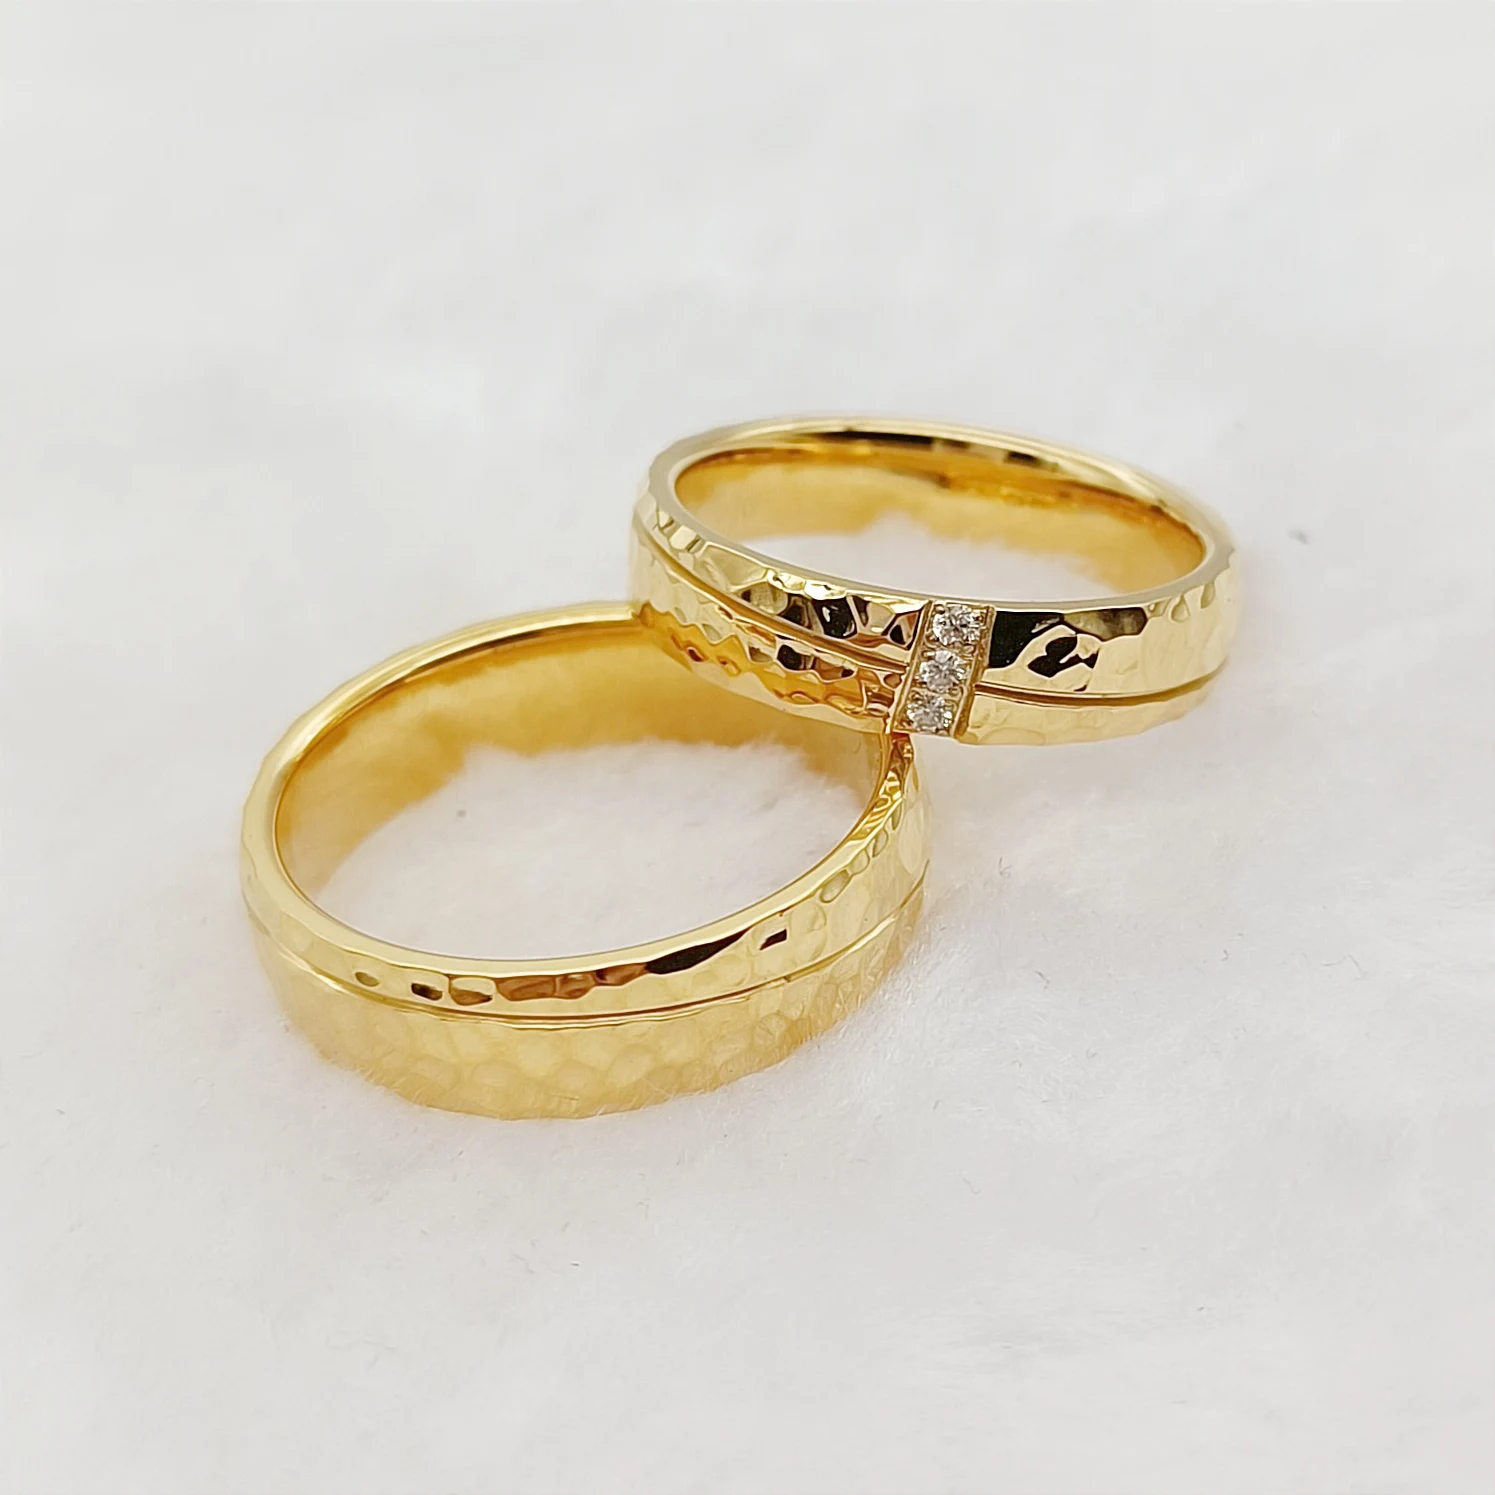 1PC 18K Gold Plated Stainless Steel Wedding Couple Ring Engagement Rings  Set | eBay